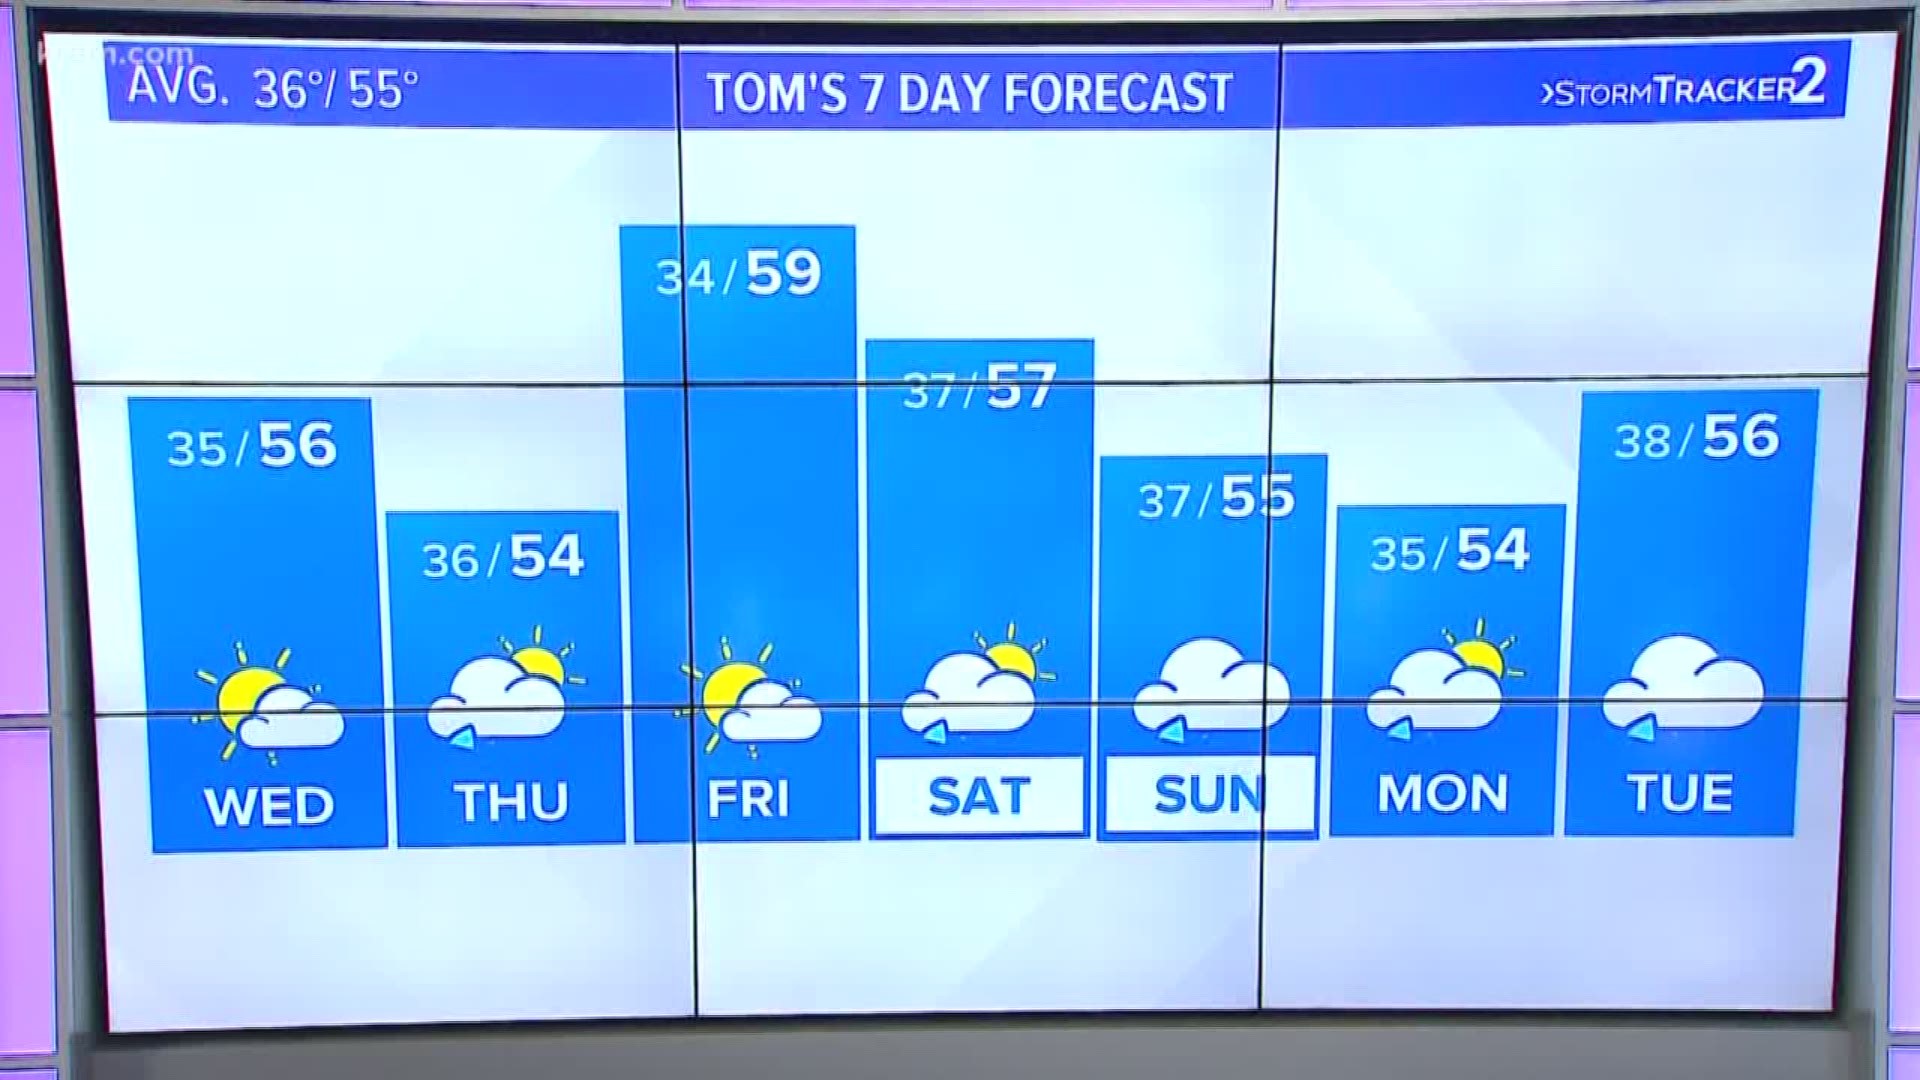 Tom Sherry gives an update on this week's forecast on April 9, 2019.